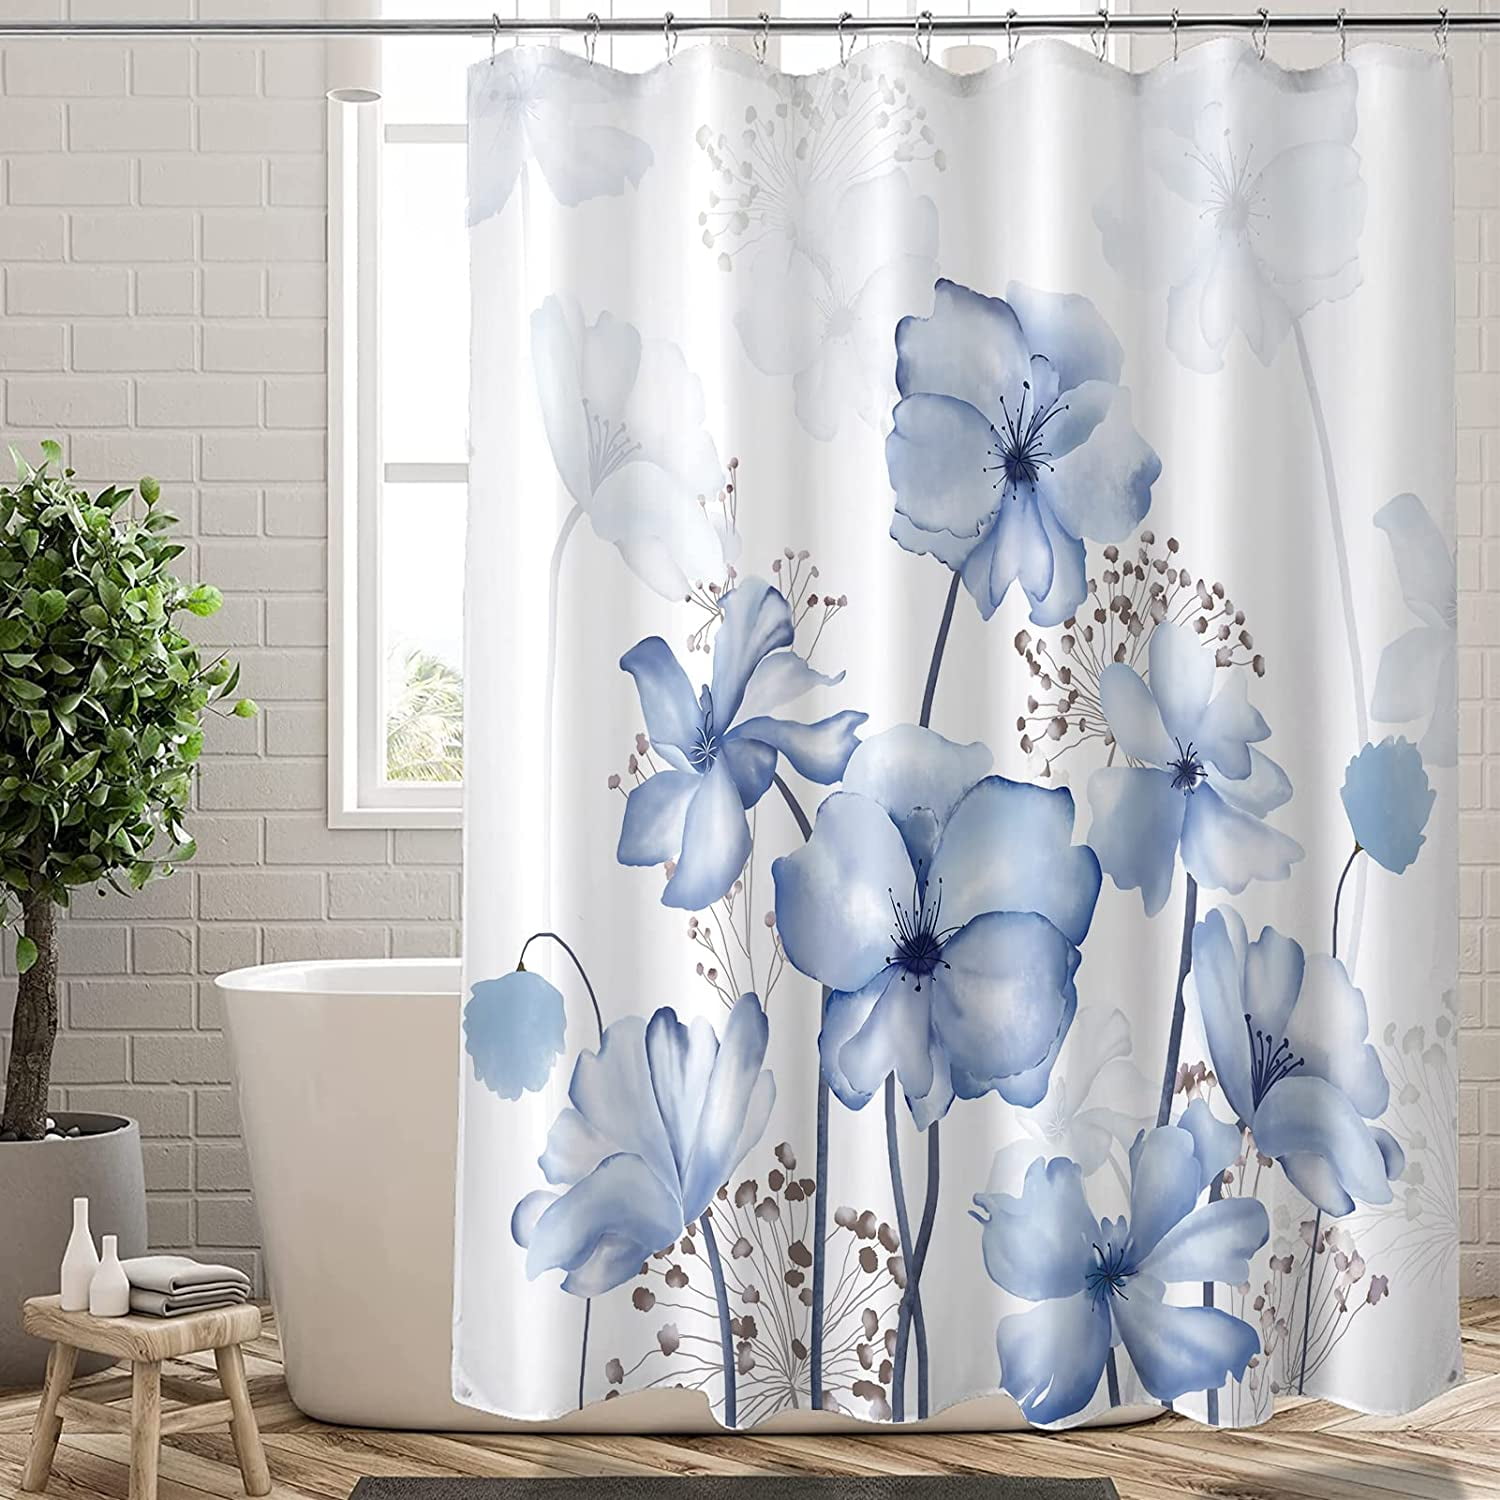 Extra Long Shower Curtain72x84 inch Length Watercolor Blue Floral ...